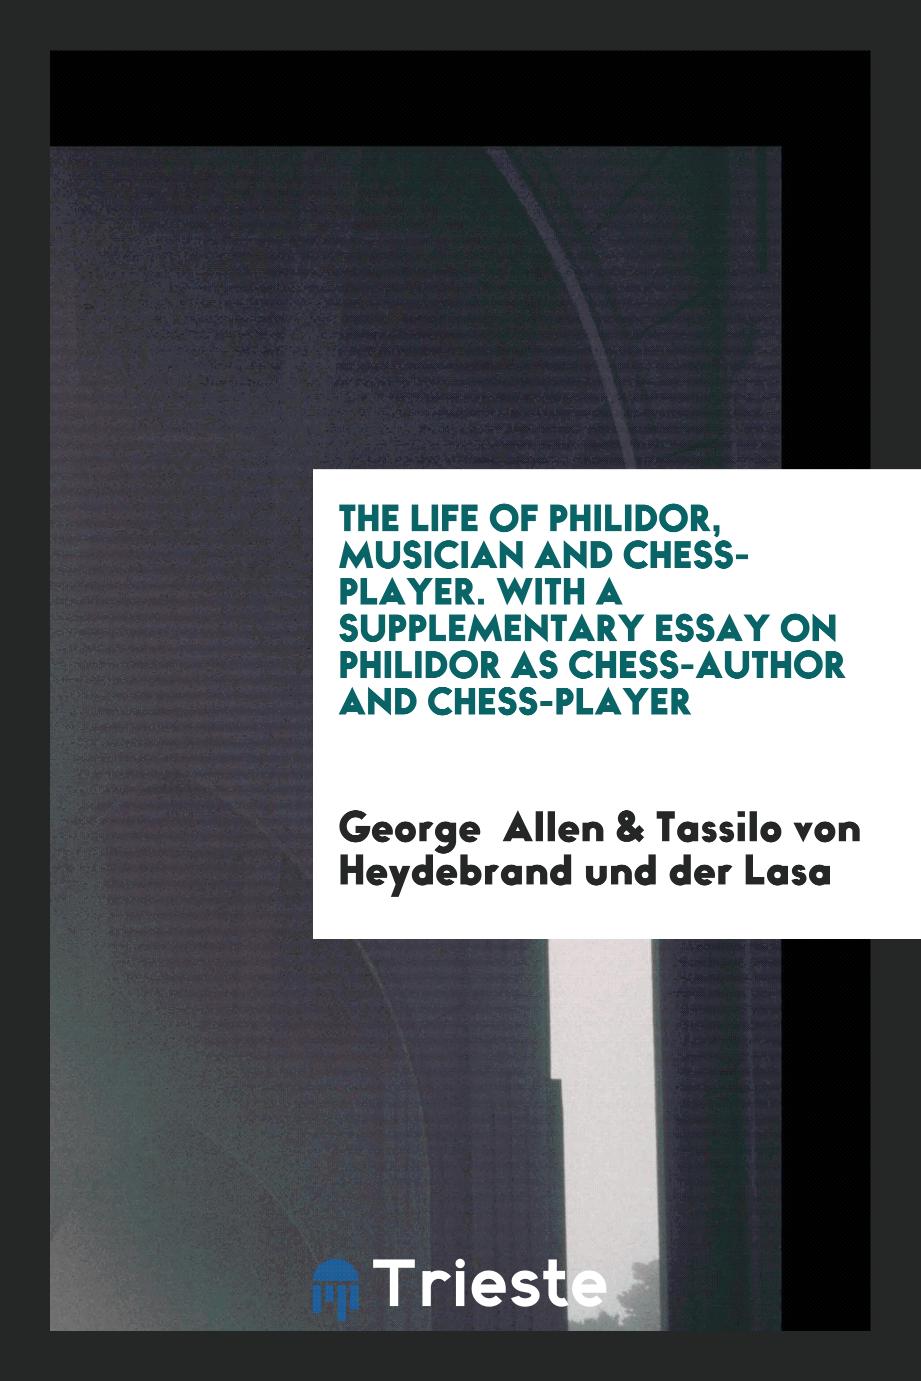 The Life of Philidor, Musician and Chess-Player. With a Supplementary Essay on Philidor as Chess-Author and Chess-Player